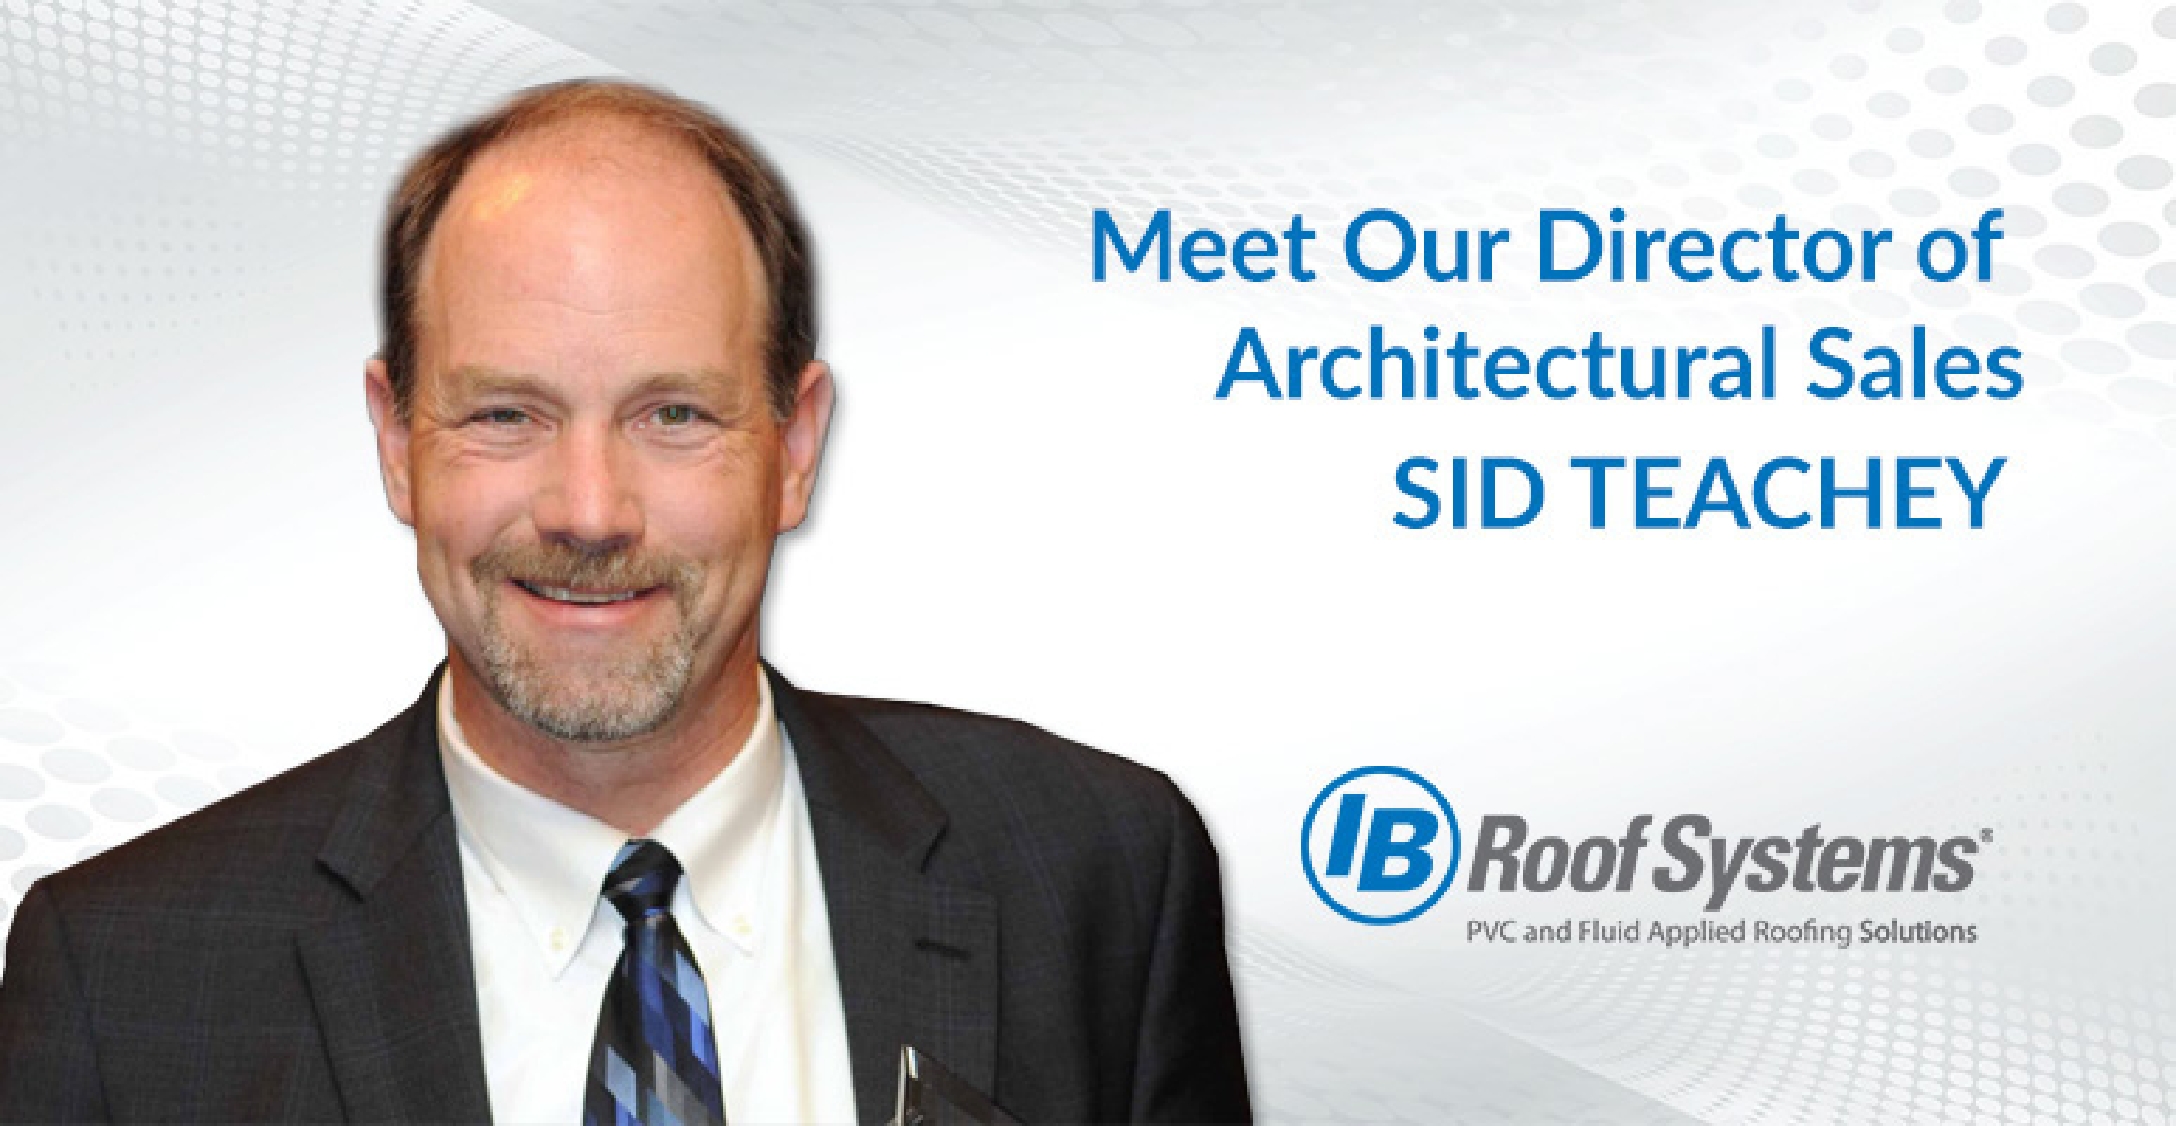 IB Roof Systems, Inc. today announced it has named Sid Teachey as the company’s director of architectural sales.